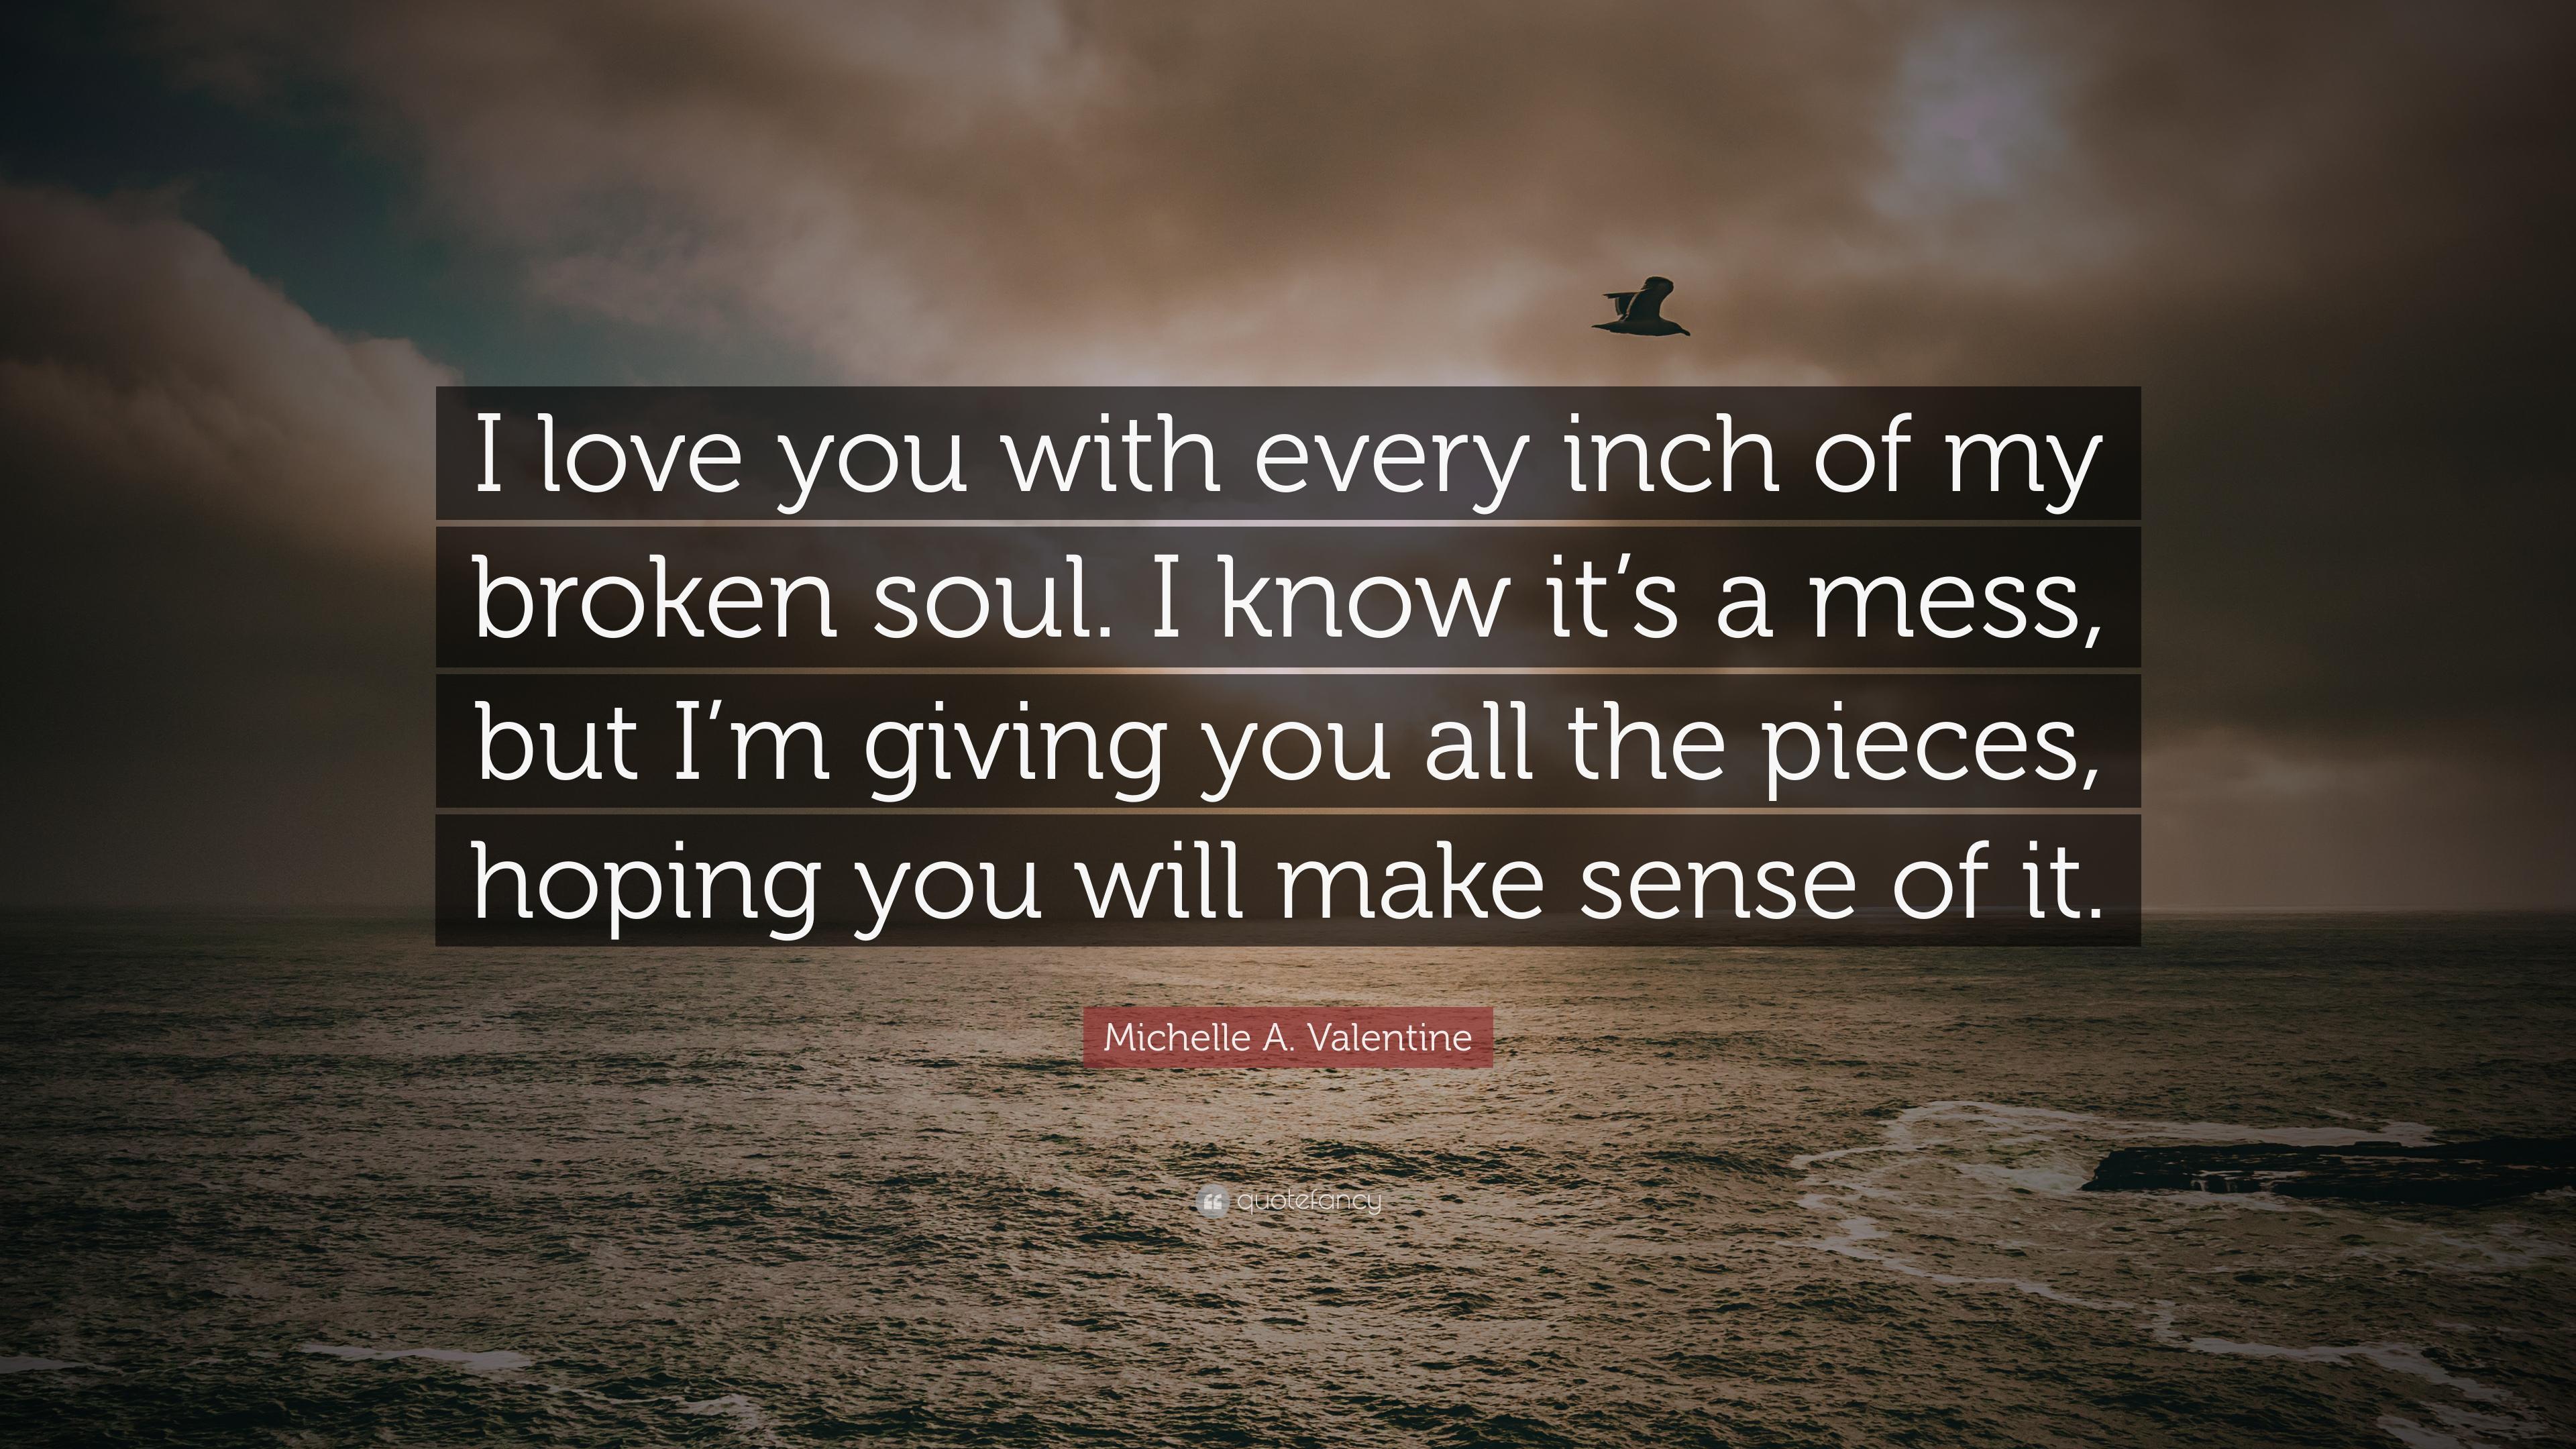 Michelle A. Valentine Quote: "I love you with every inch of my 